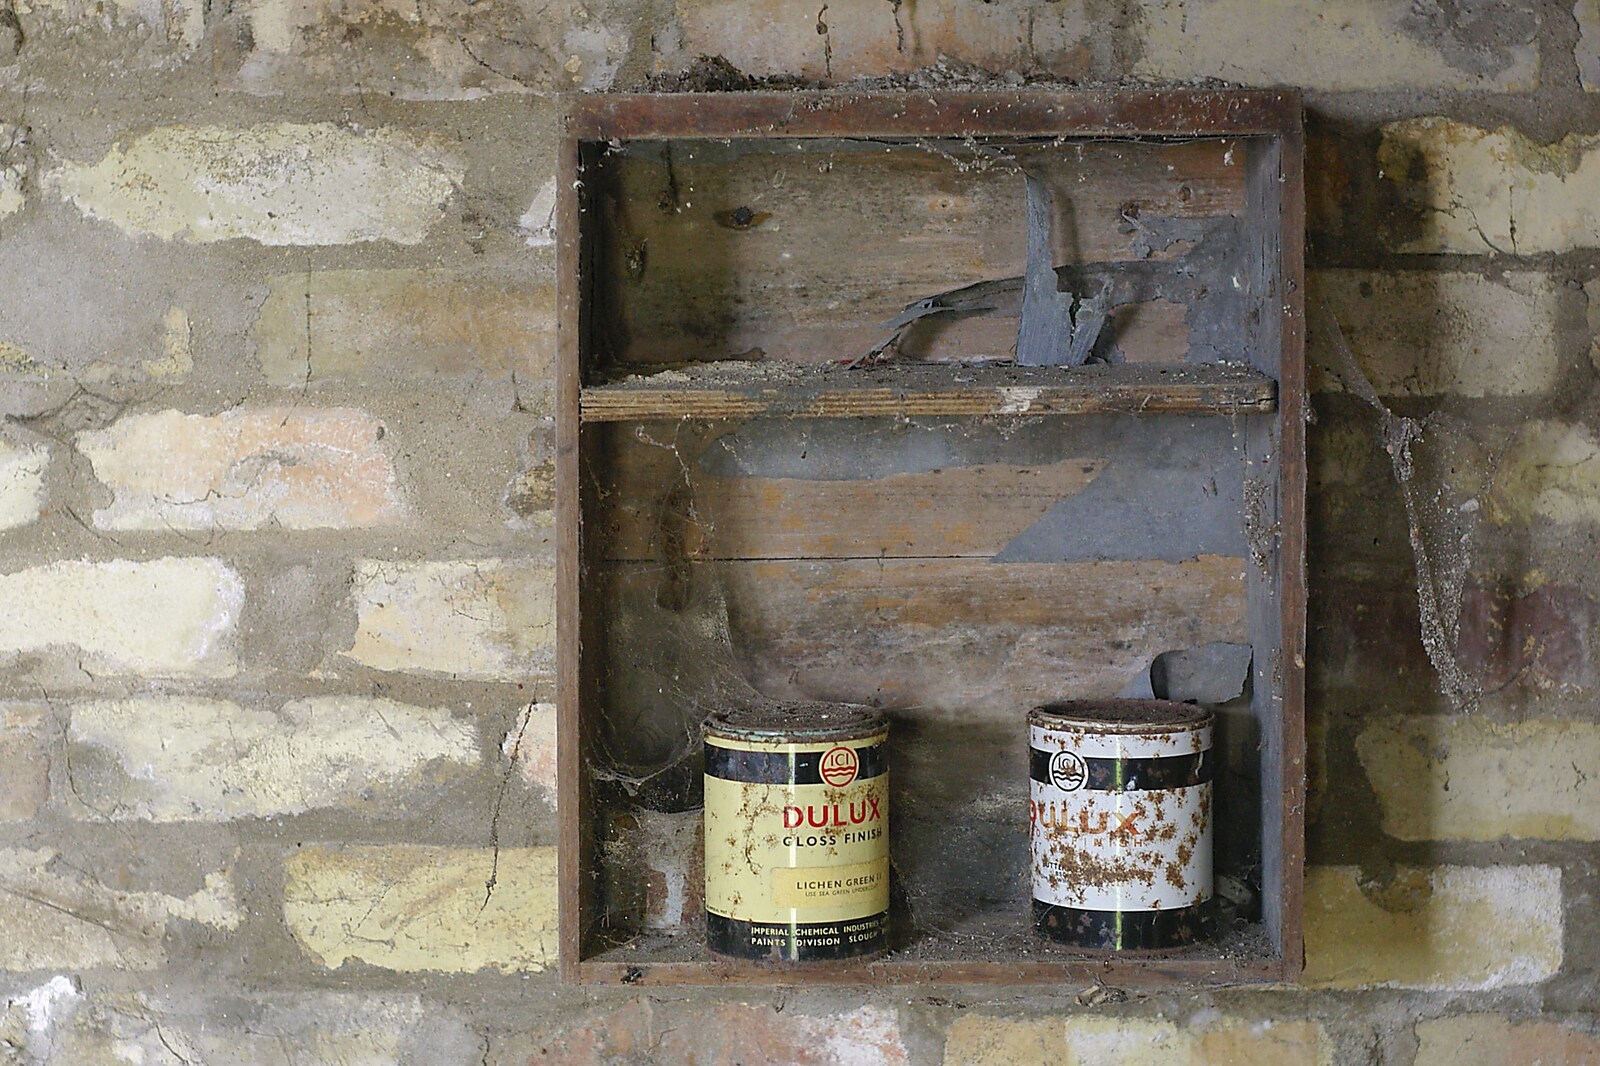 Two folorn old tins of ICI Dulux paint from An Elegy for a Shed, Hopton, Suffolk - 28th March 2005